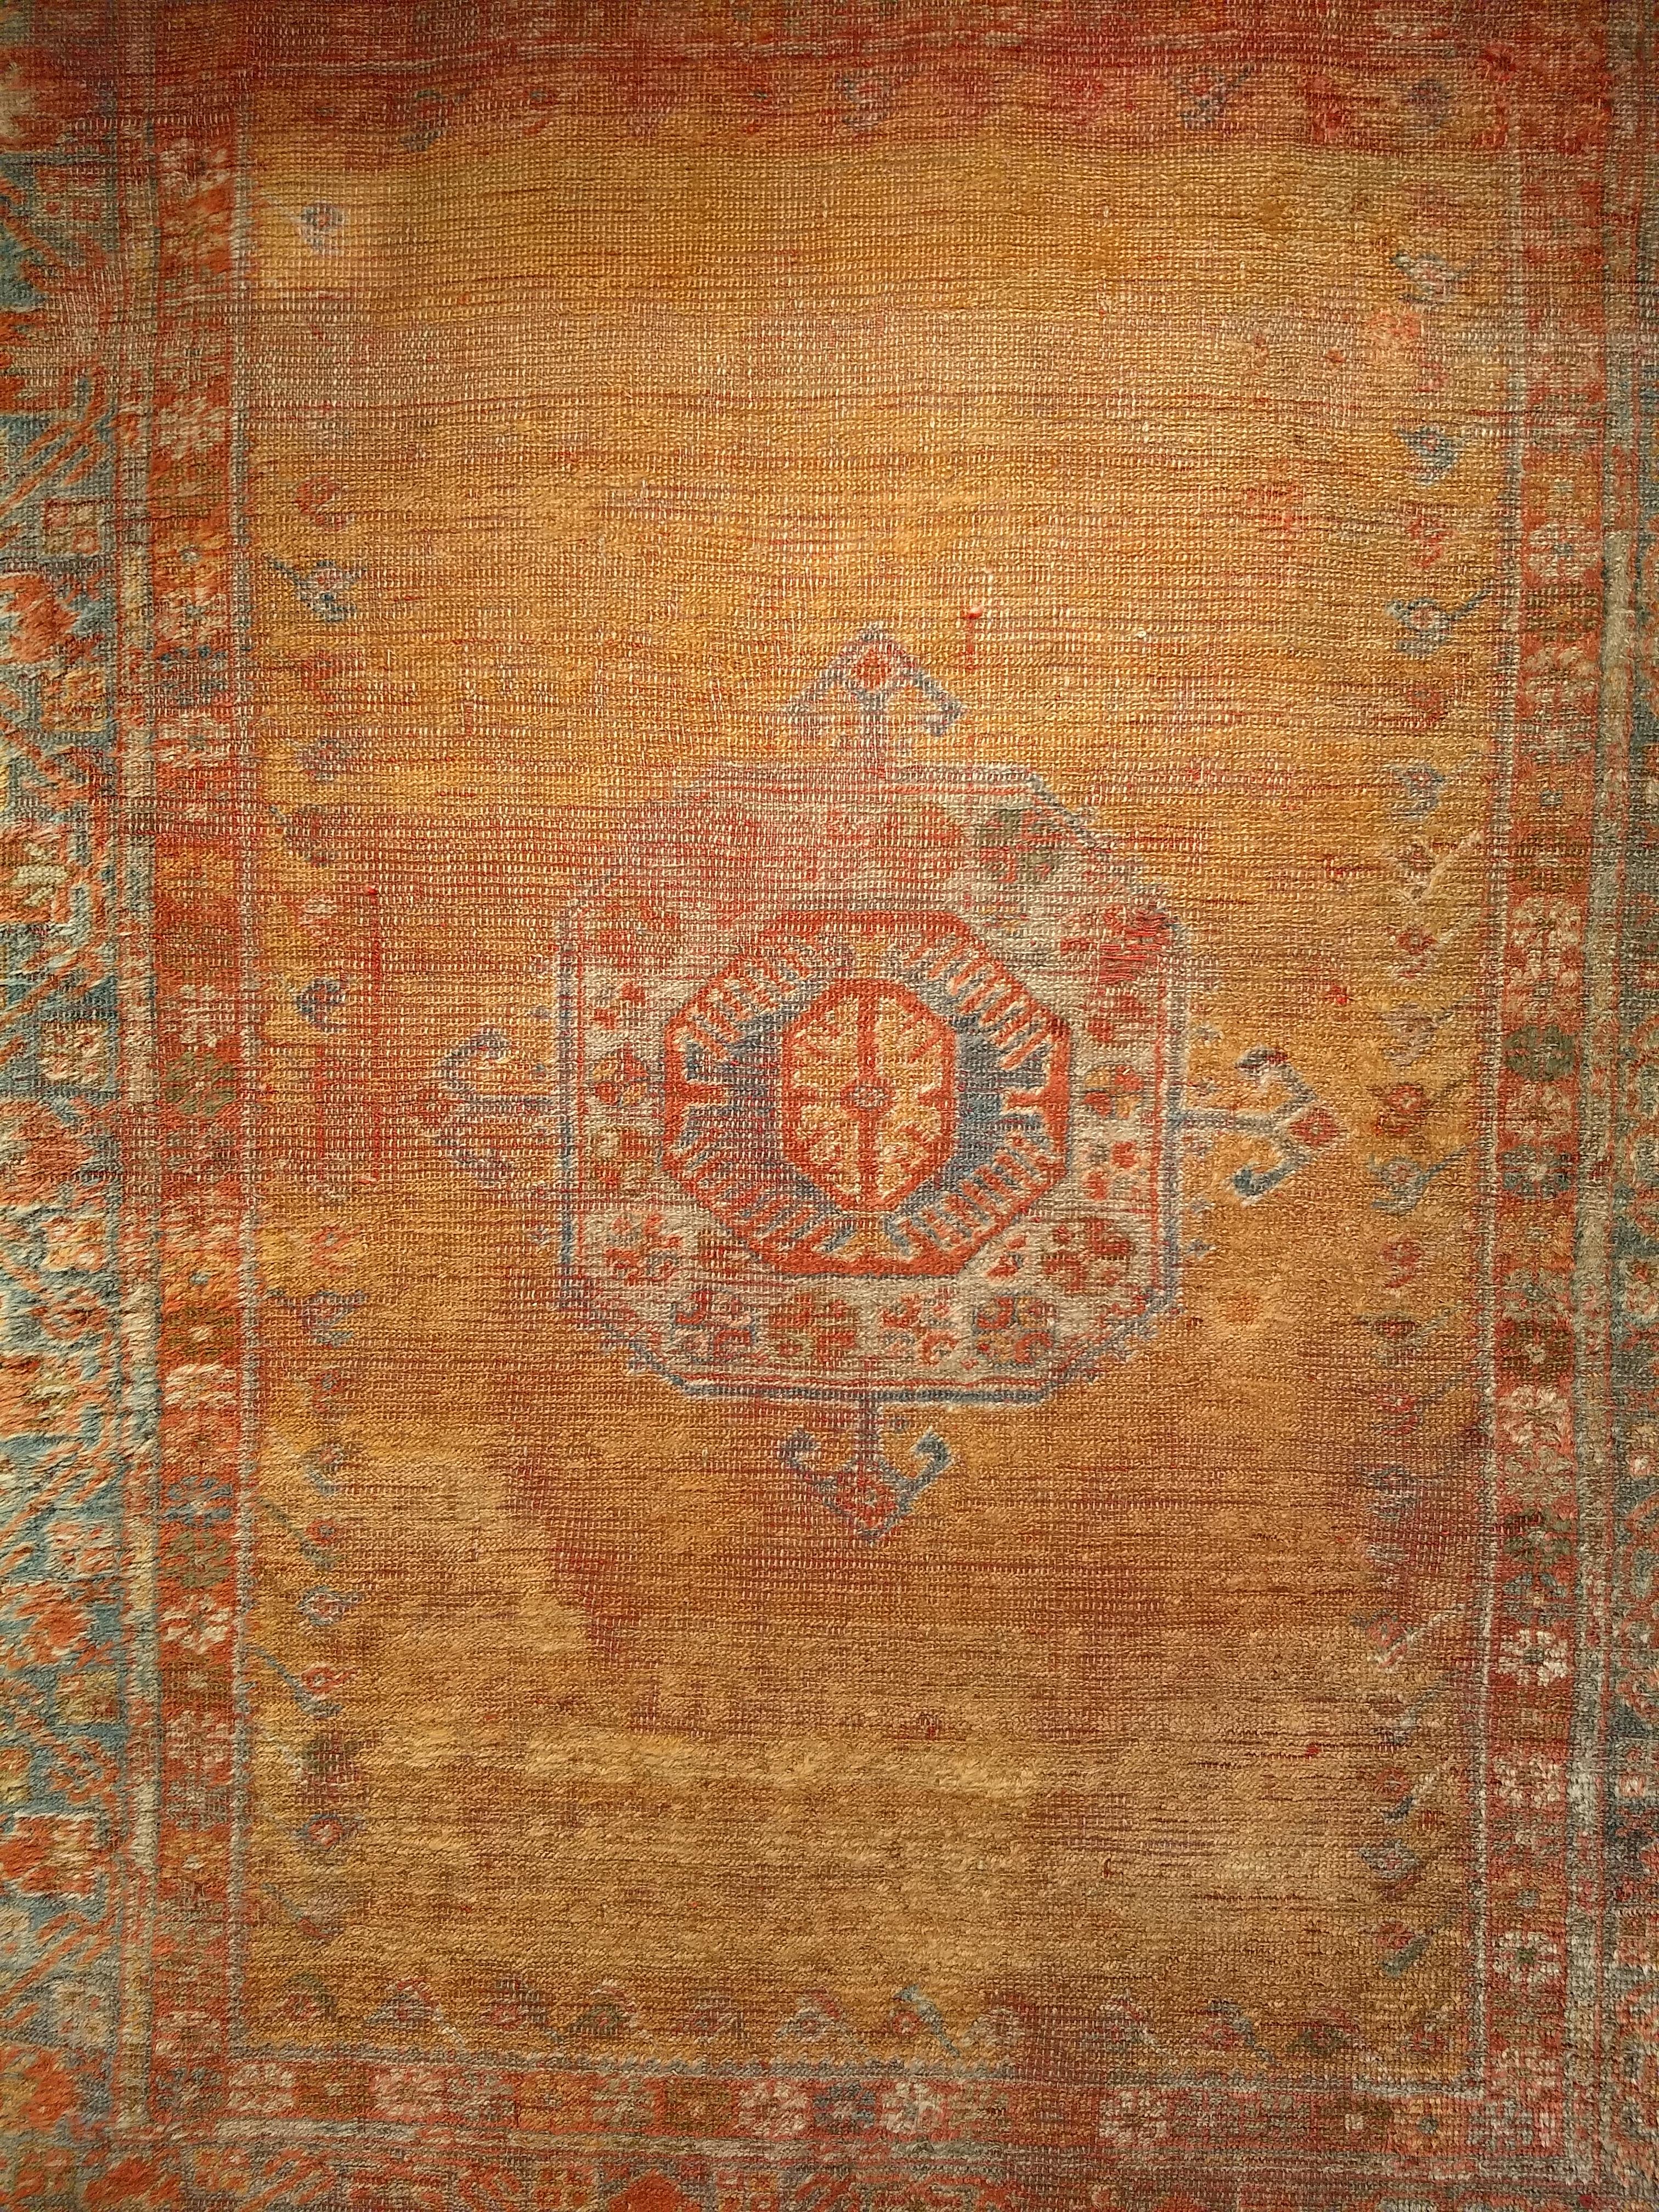 A Turkish Oushak area rug  from the 3rd quarter of the 1800s.  The rug has the classic design of the Mamluk rugs from the 15th and 16th centuries.   The rug has a beautiful saffron yellow field. It has a small central medallion in blue/green and